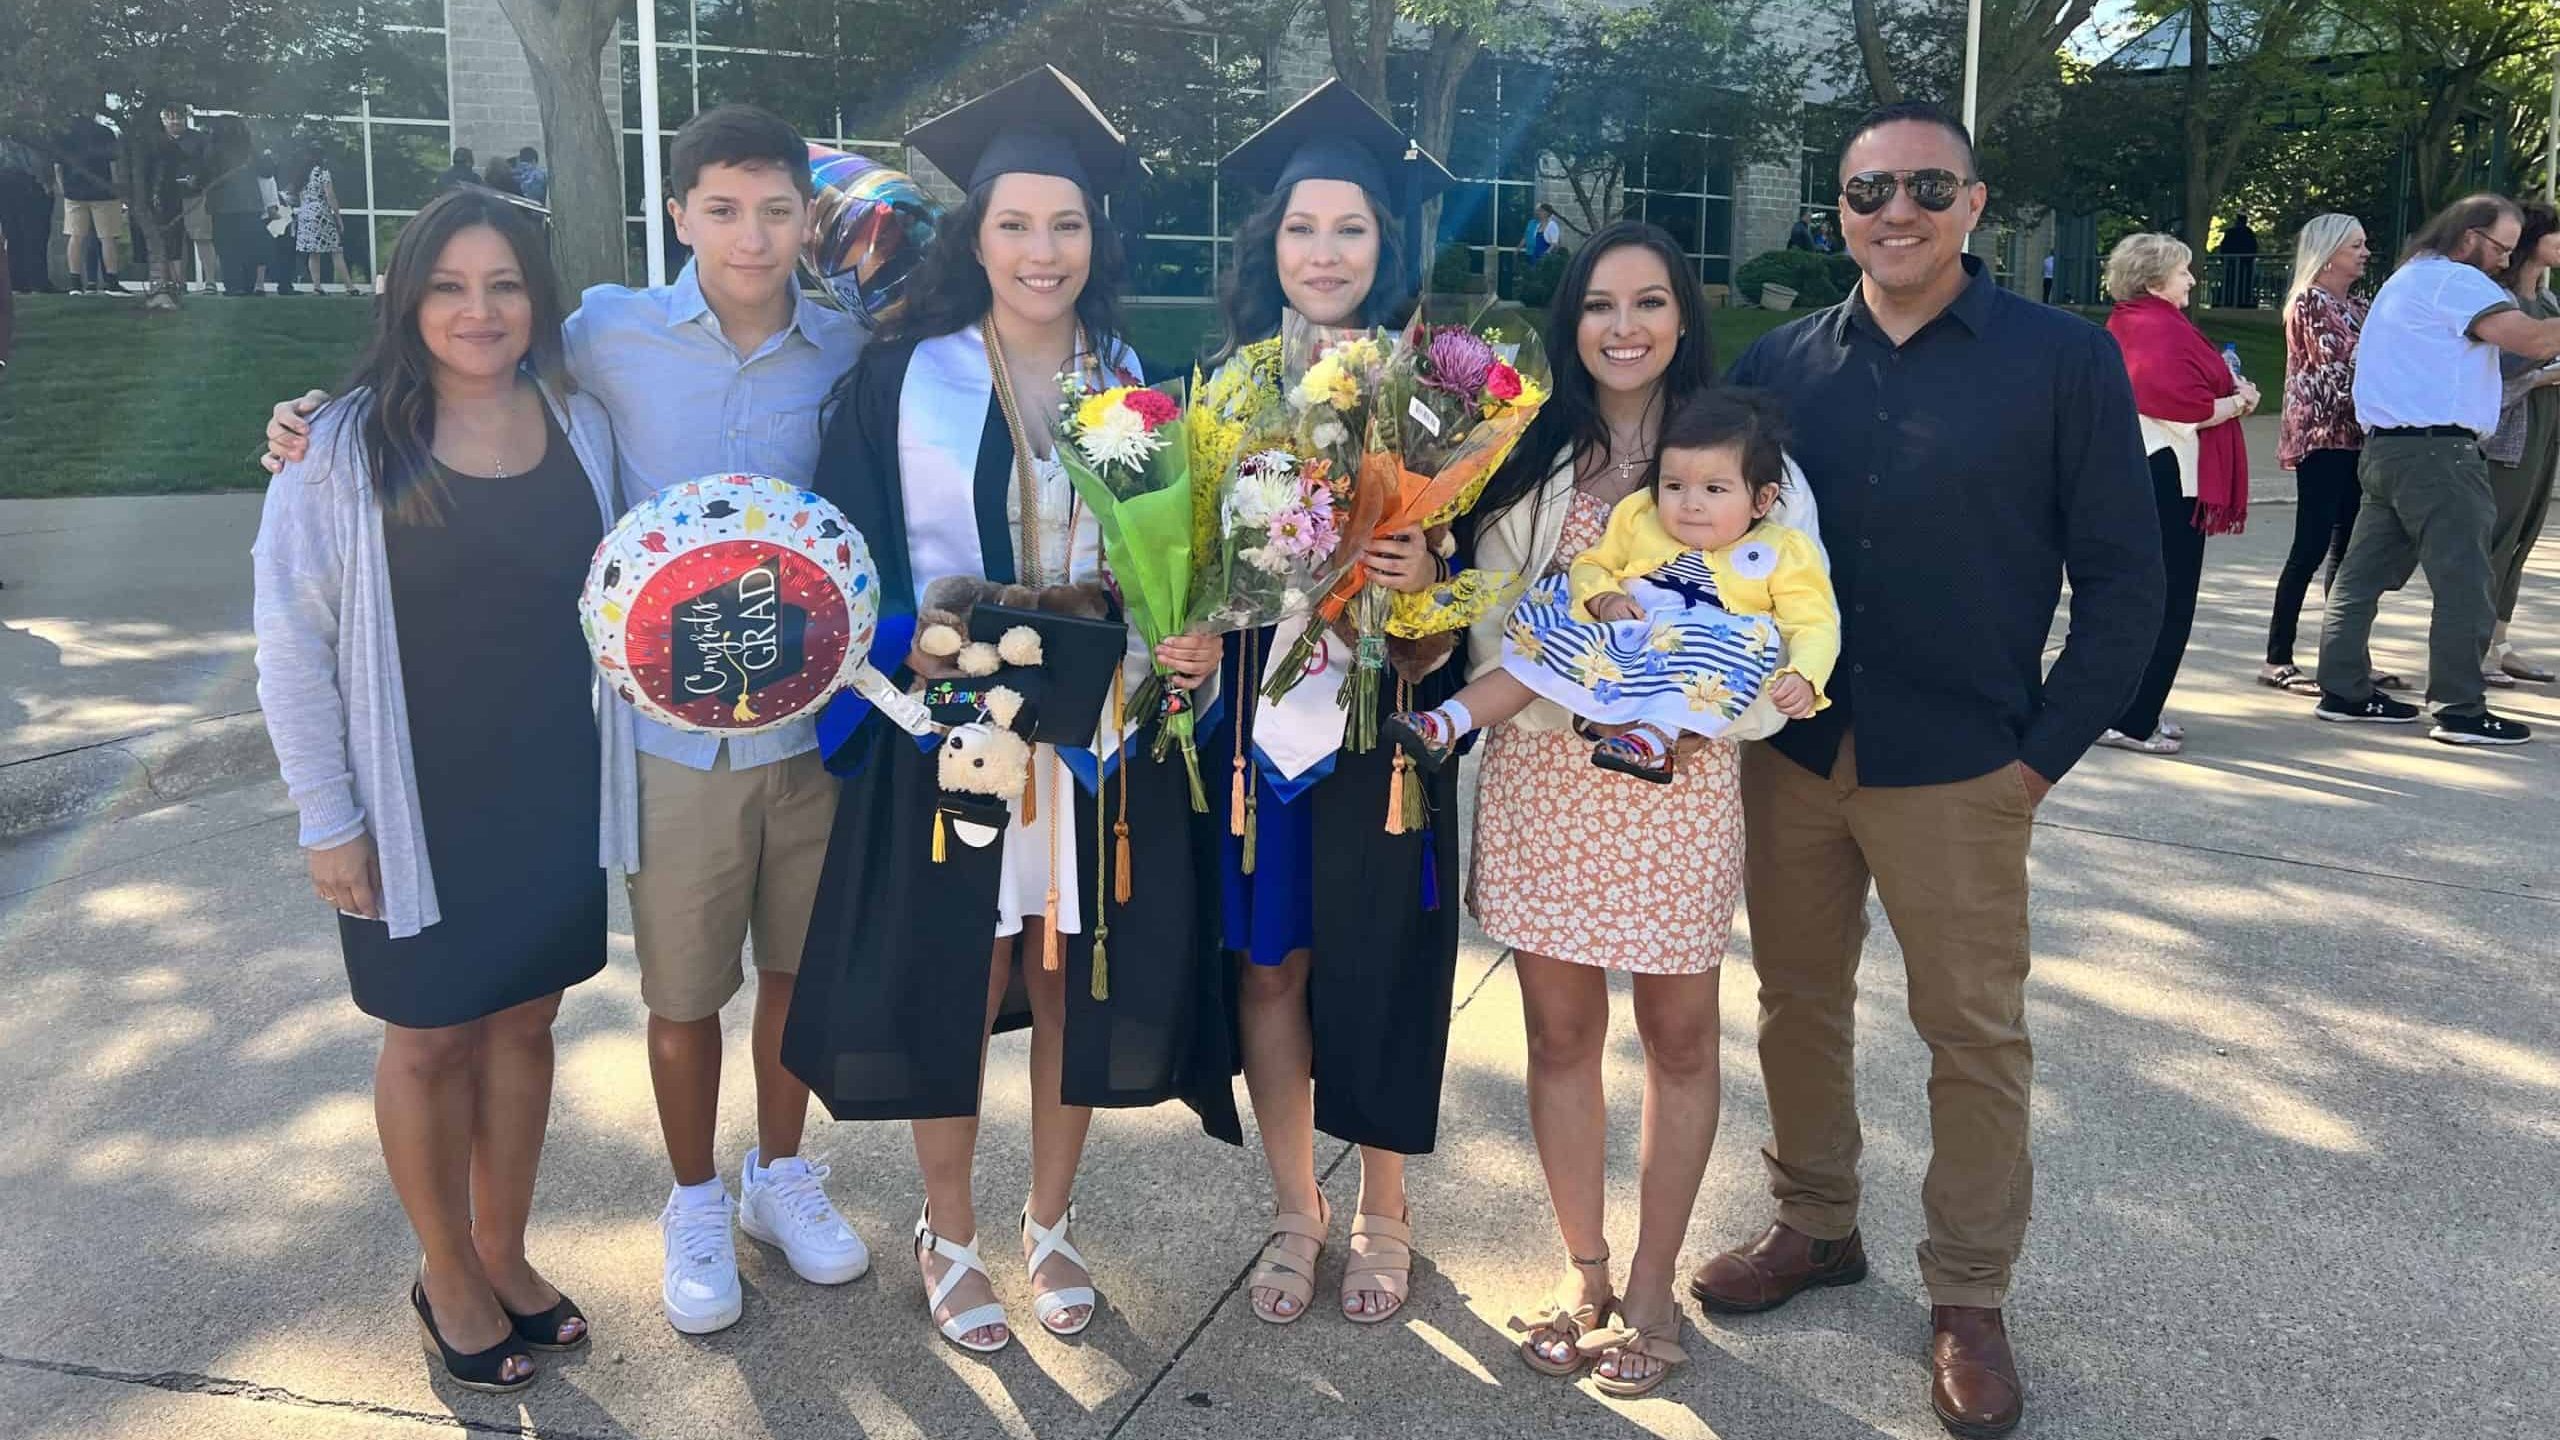 Gabi's graduation picture with her family